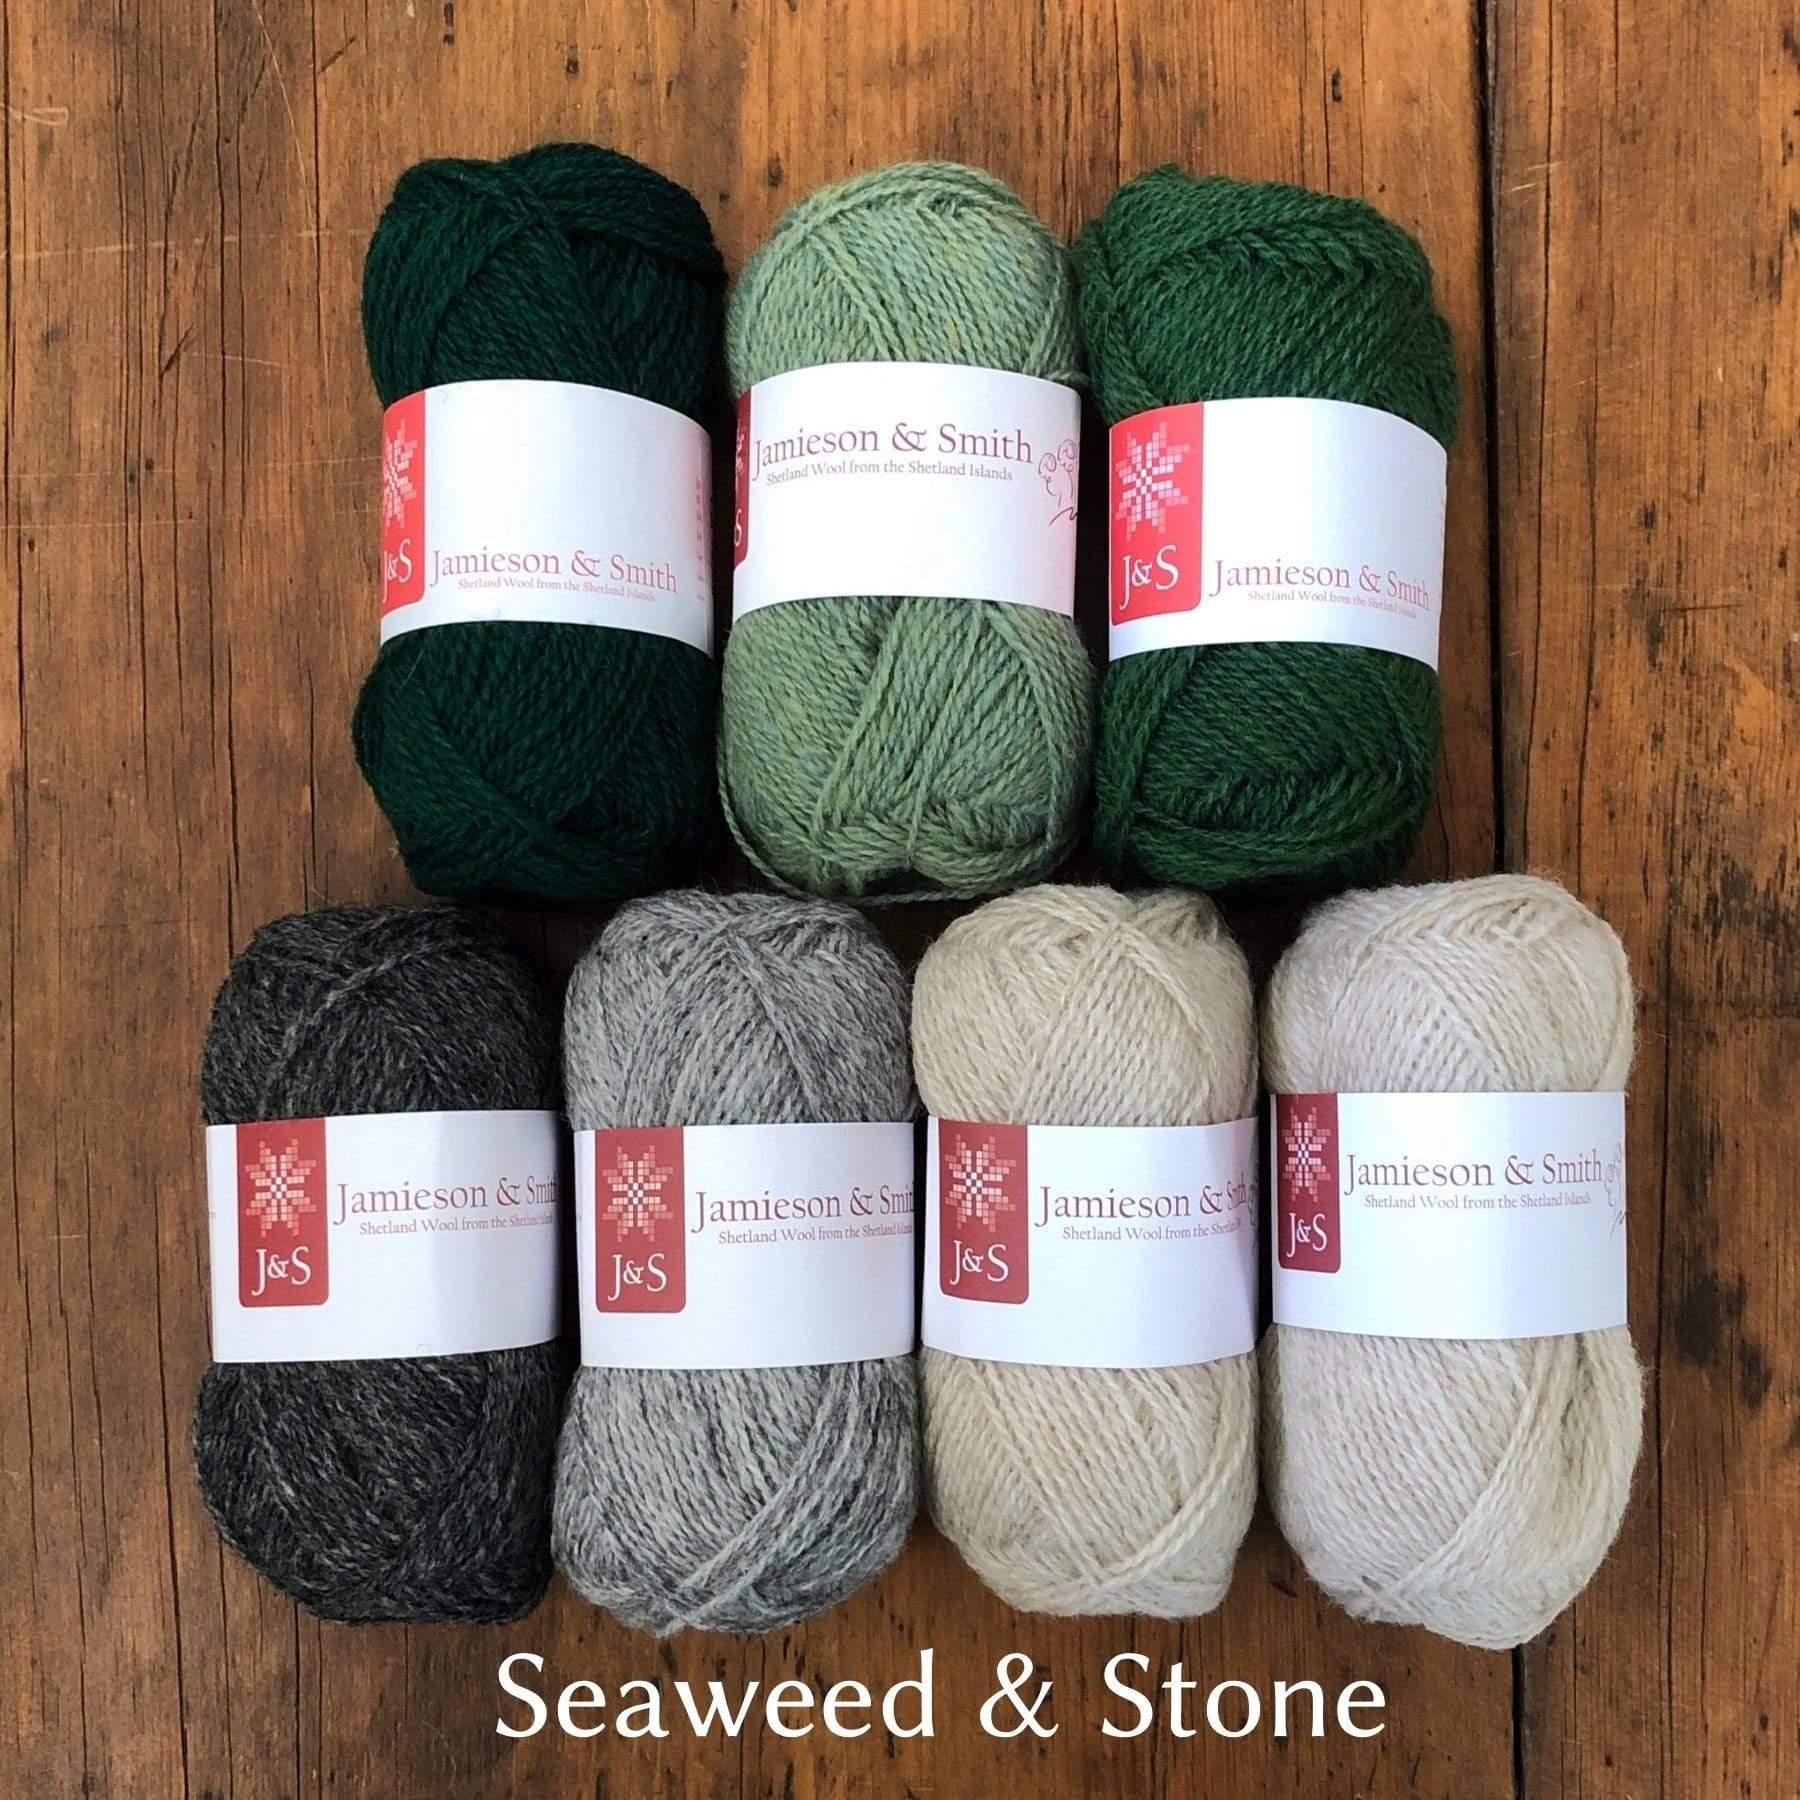 Jamieson and Smith yarn in shades of beige, gray and green.